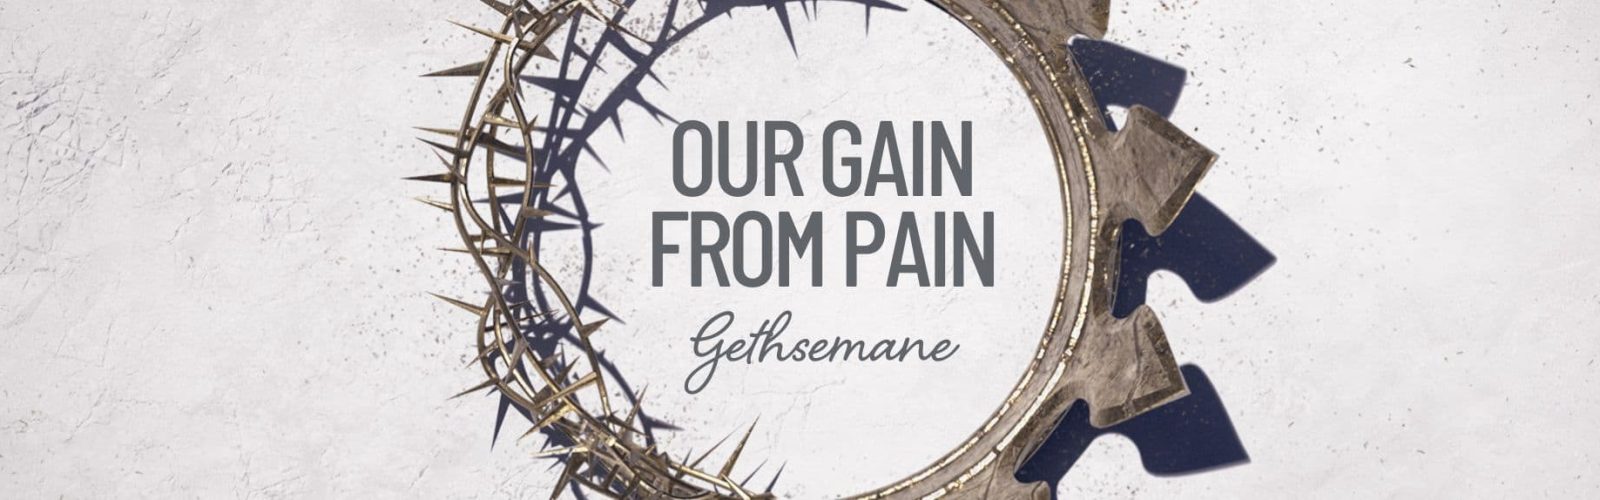 Our Gain From Pain